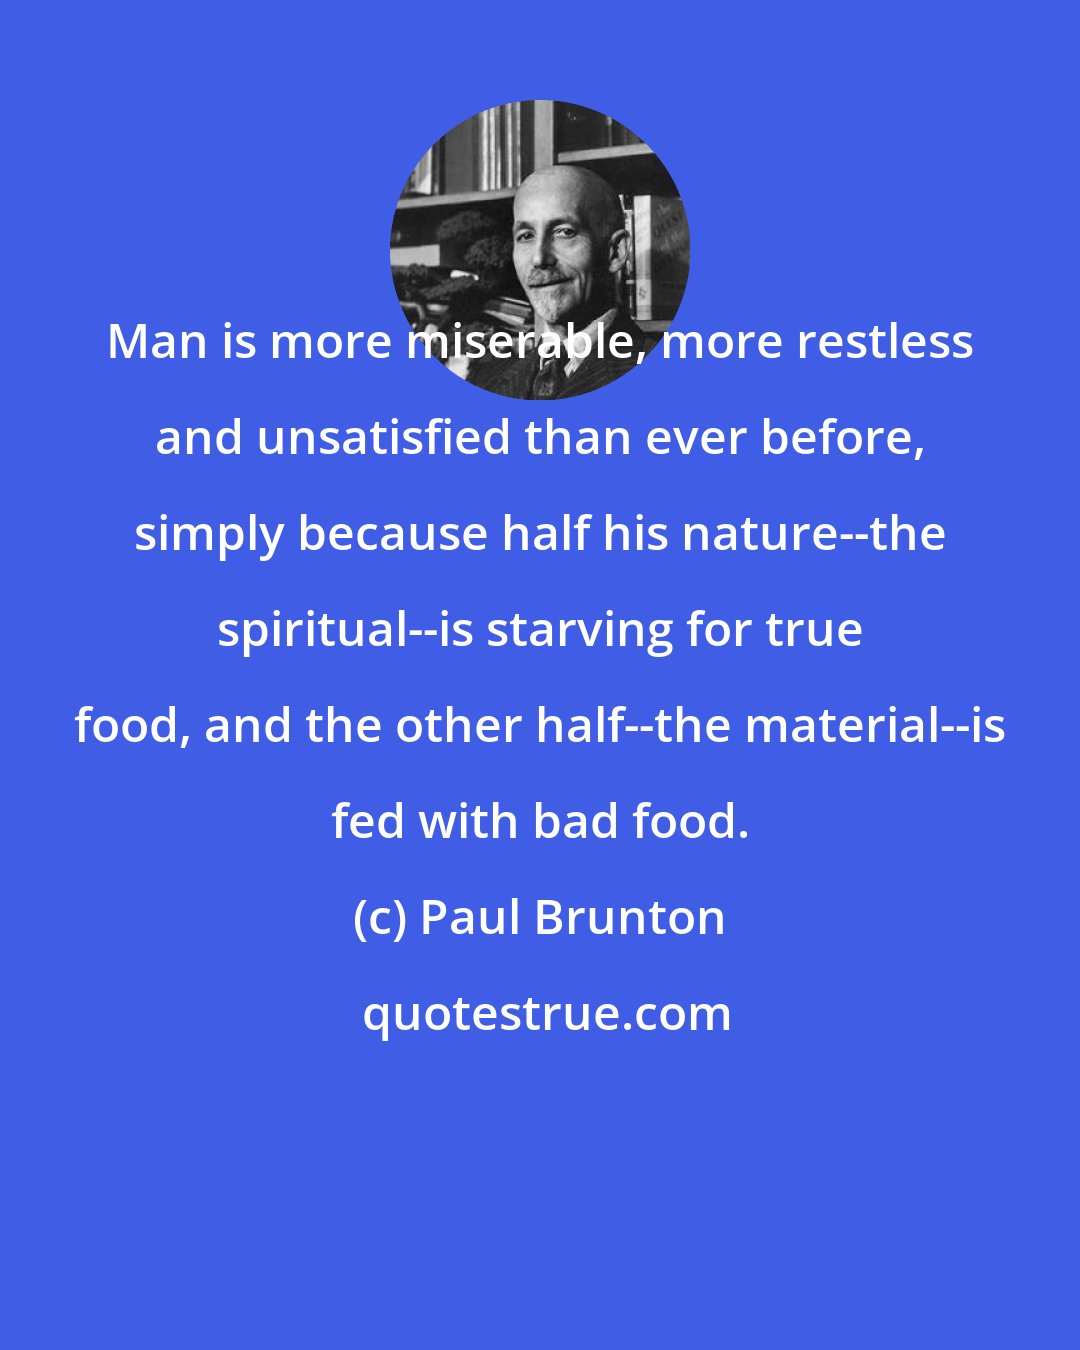 Paul Brunton: Man is more miserable, more restless and unsatisfied than ever before, simply because half his nature--the spiritual--is starving for true food, and the other half--the material--is fed with bad food.